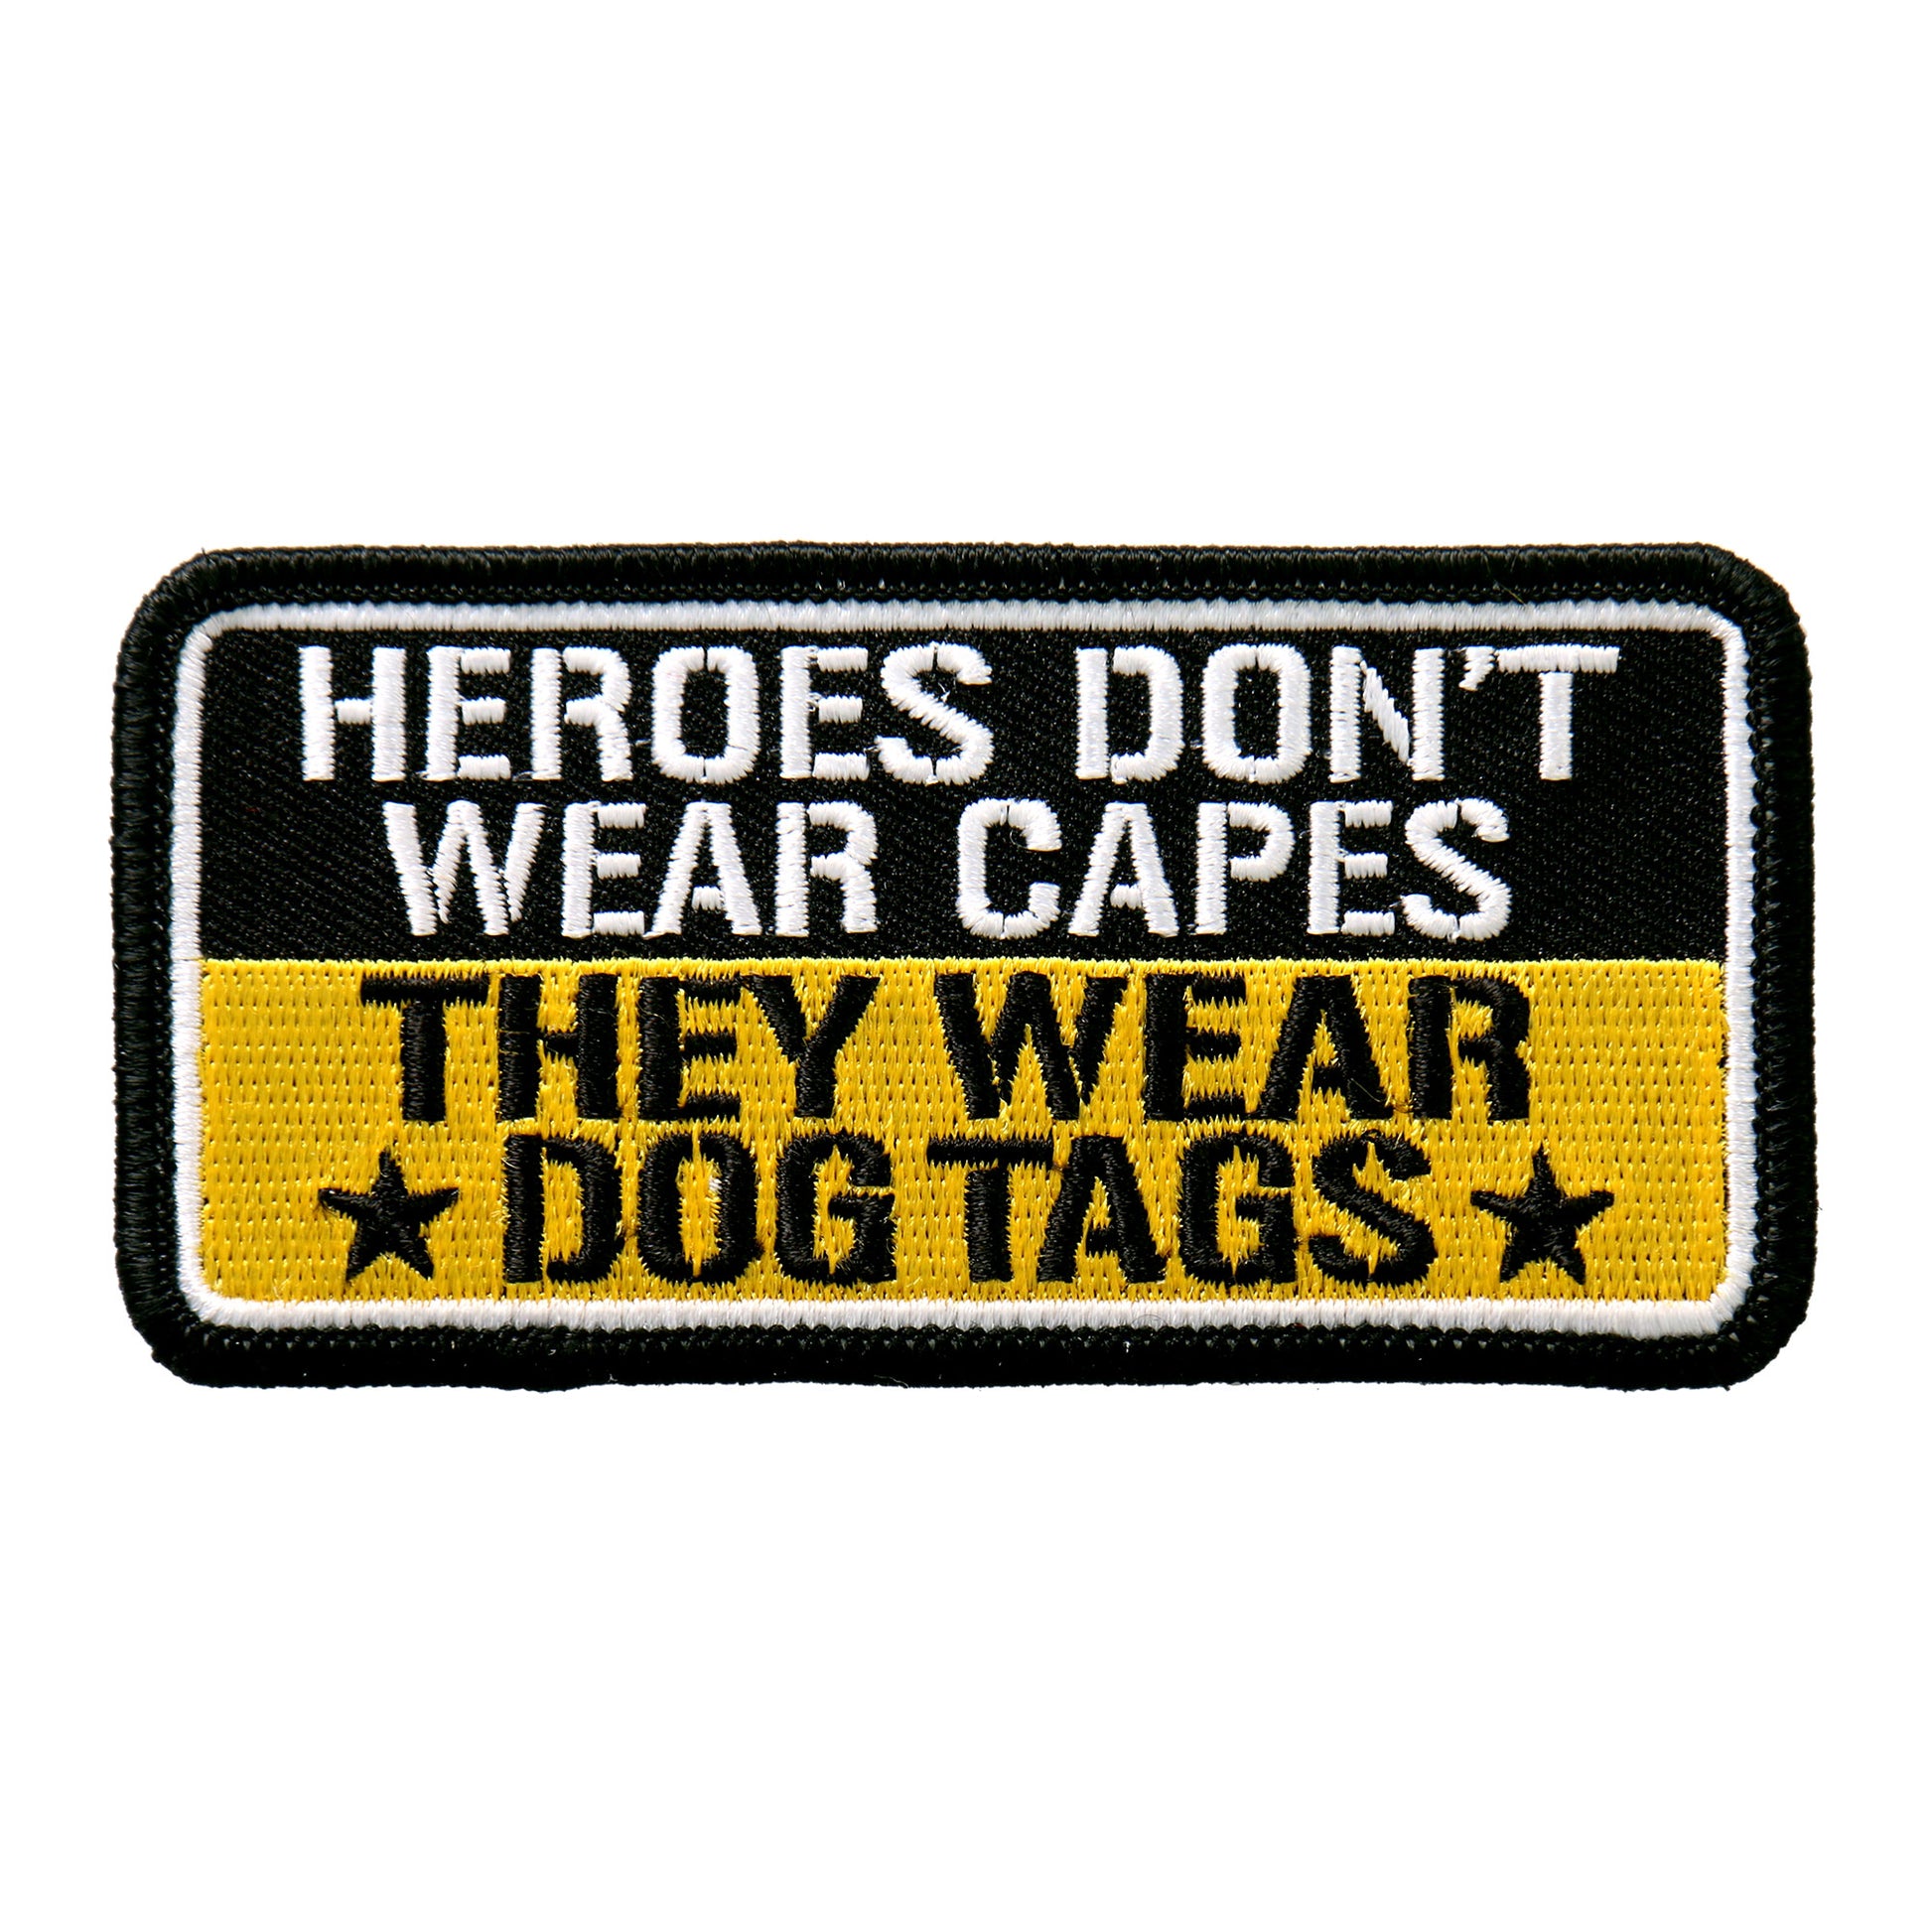 Hot Leathers PPL9496 Heroes Don’t Wear Capes 4"x2" Patch